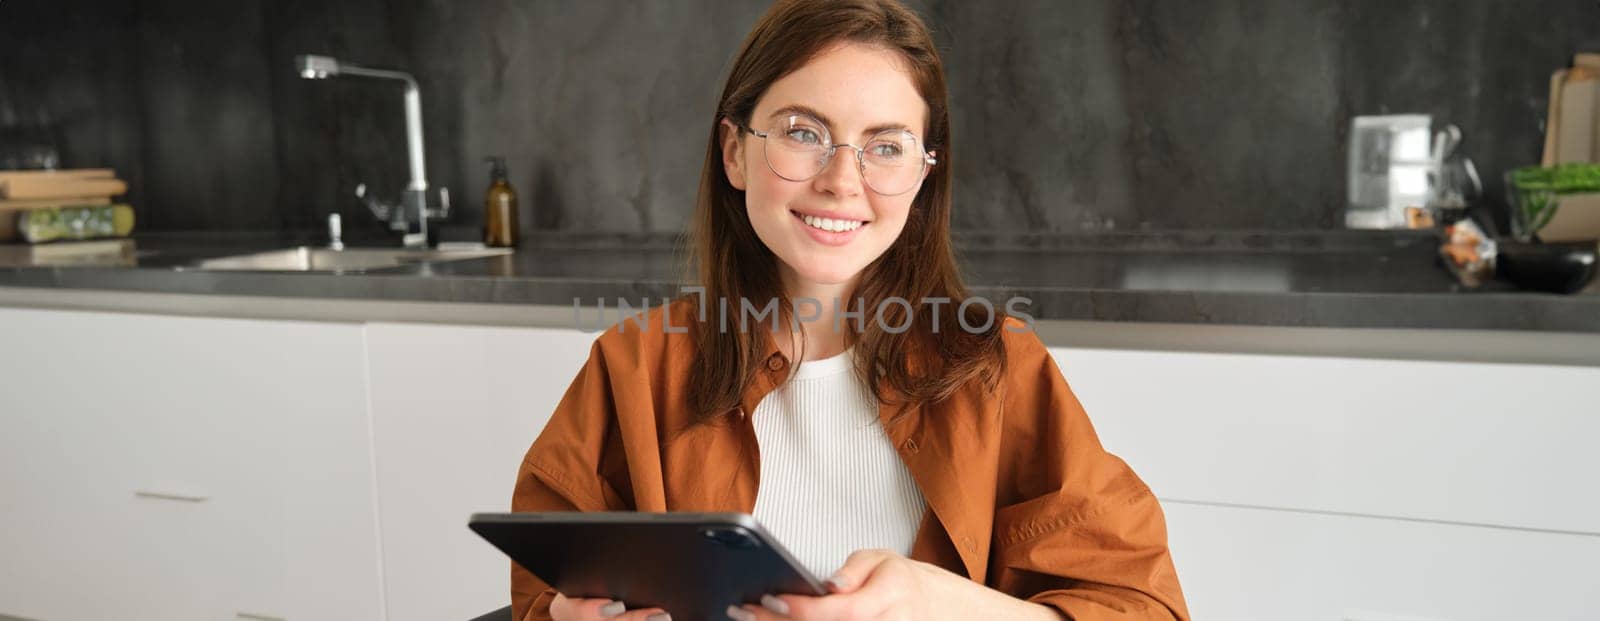 Portrait of beautiful young brunette woman, holding digital tablet, reading with glasses, smiling, surfing the net using gadget.